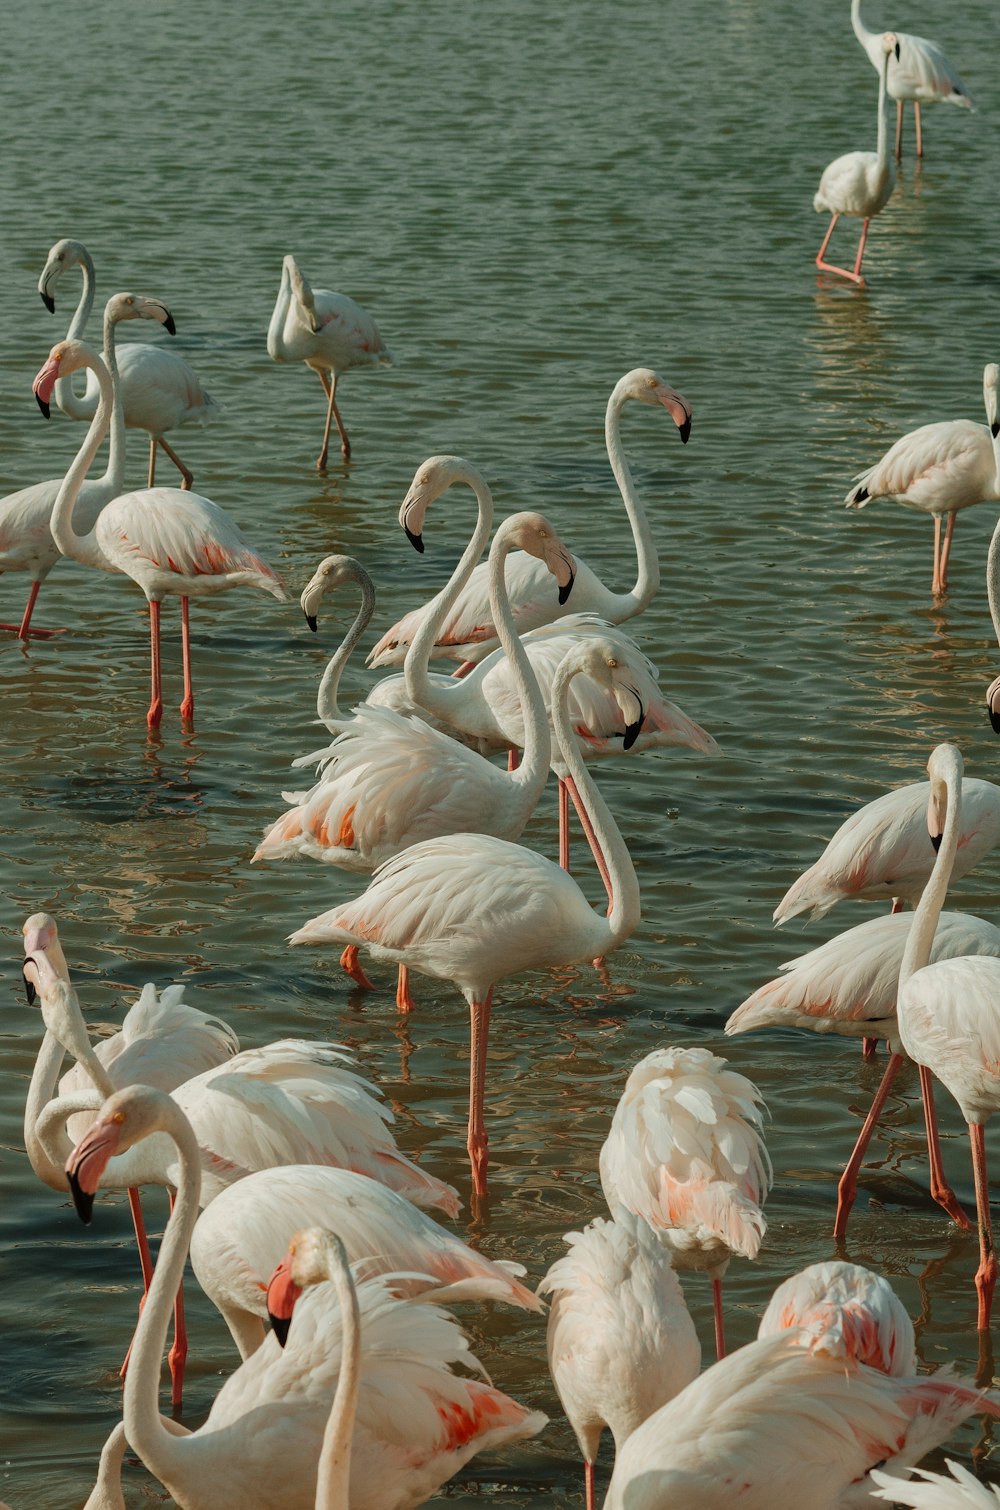 a group of flamingos in the water